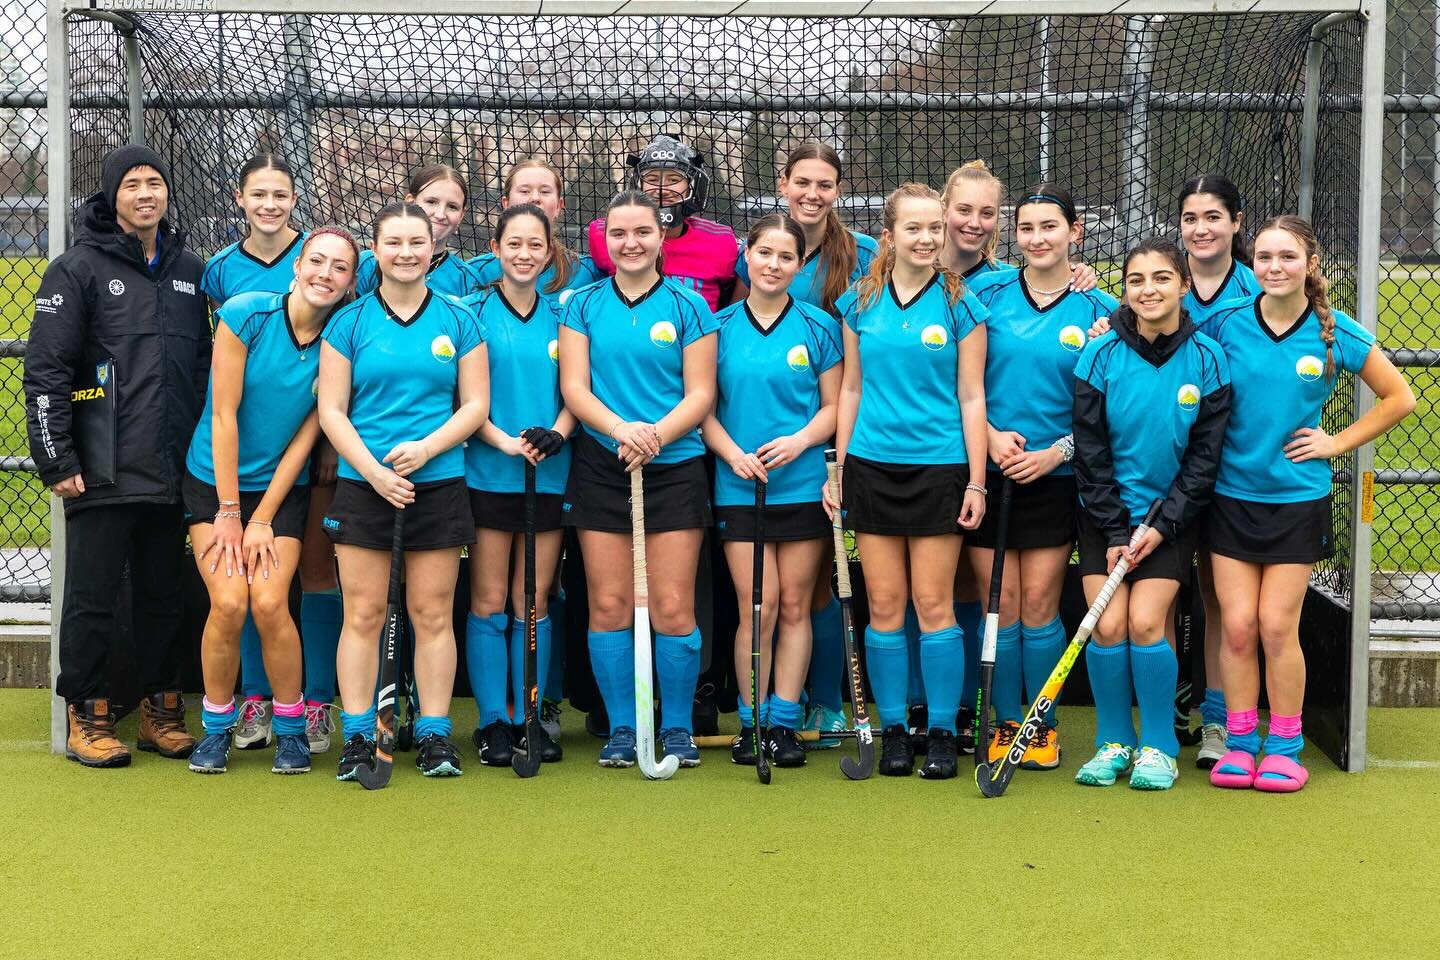 &ldquo;🏑 Our Sea to Sky 3 team has shown incredible growth and determination this season, playing their hearts out in the playoff finals. Though we didn&rsquo;t clinch the final title, the journey has been nothing short of inspiring. Congratulations